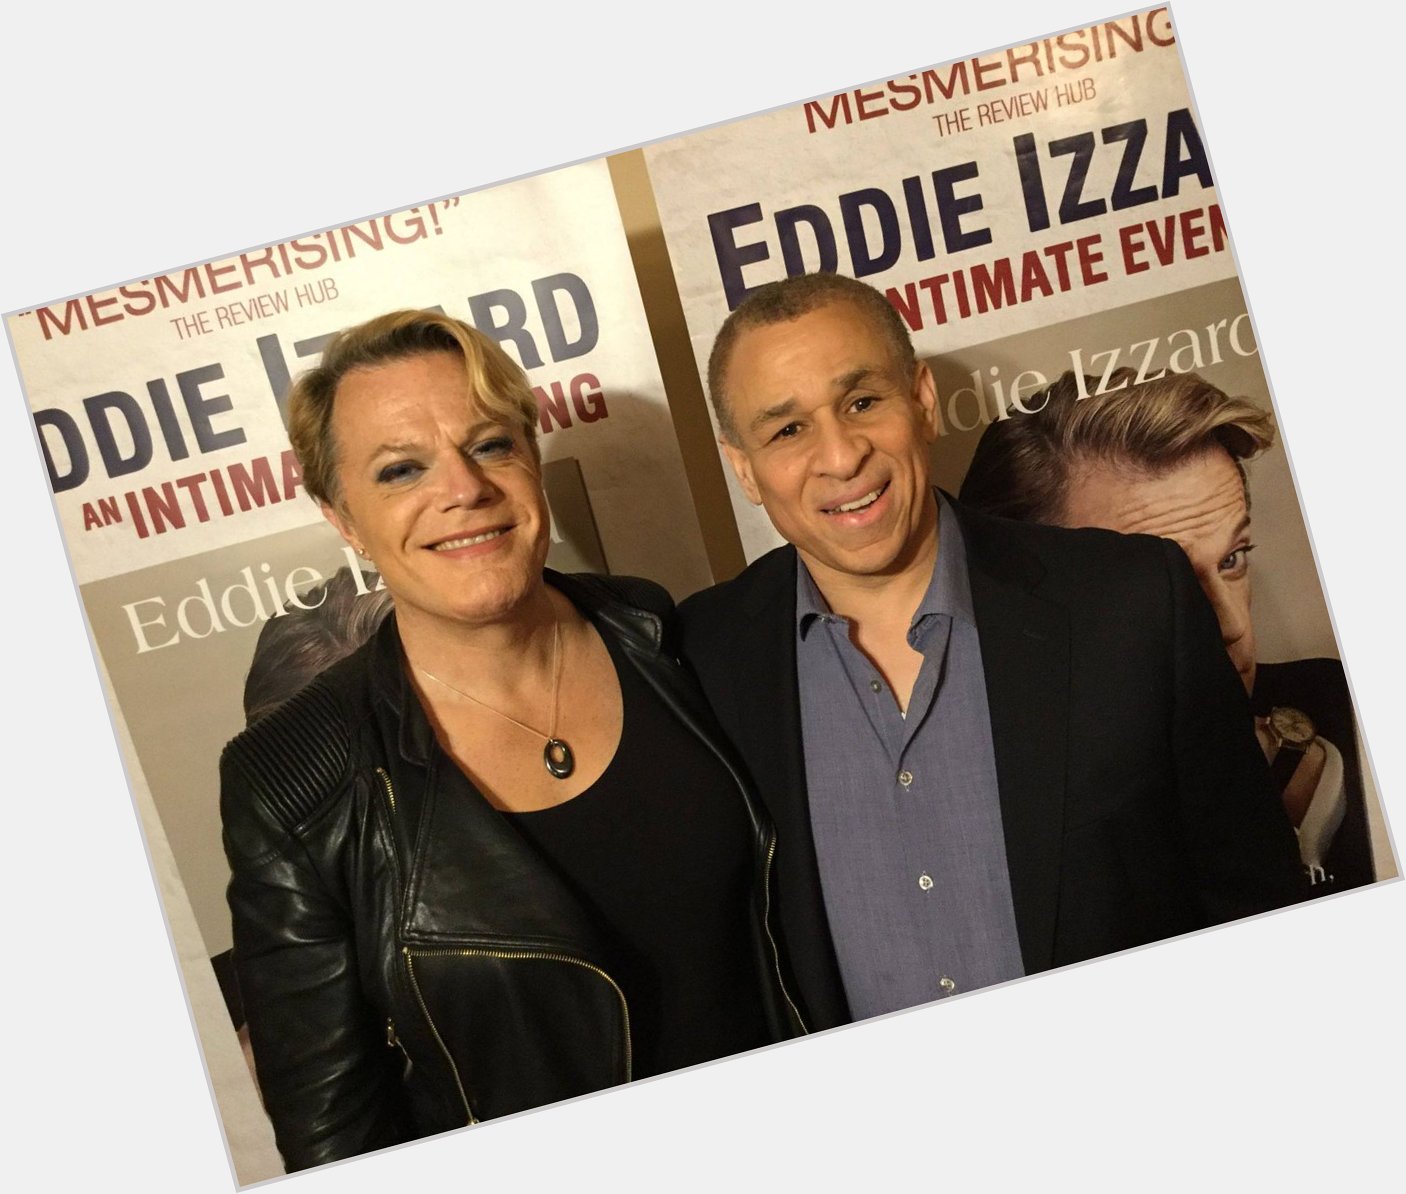 HAPPY 59th BIRTHDAY TODAY (February 7th) to my favorite comedian, the brilliant EDDIE IZZARD! 